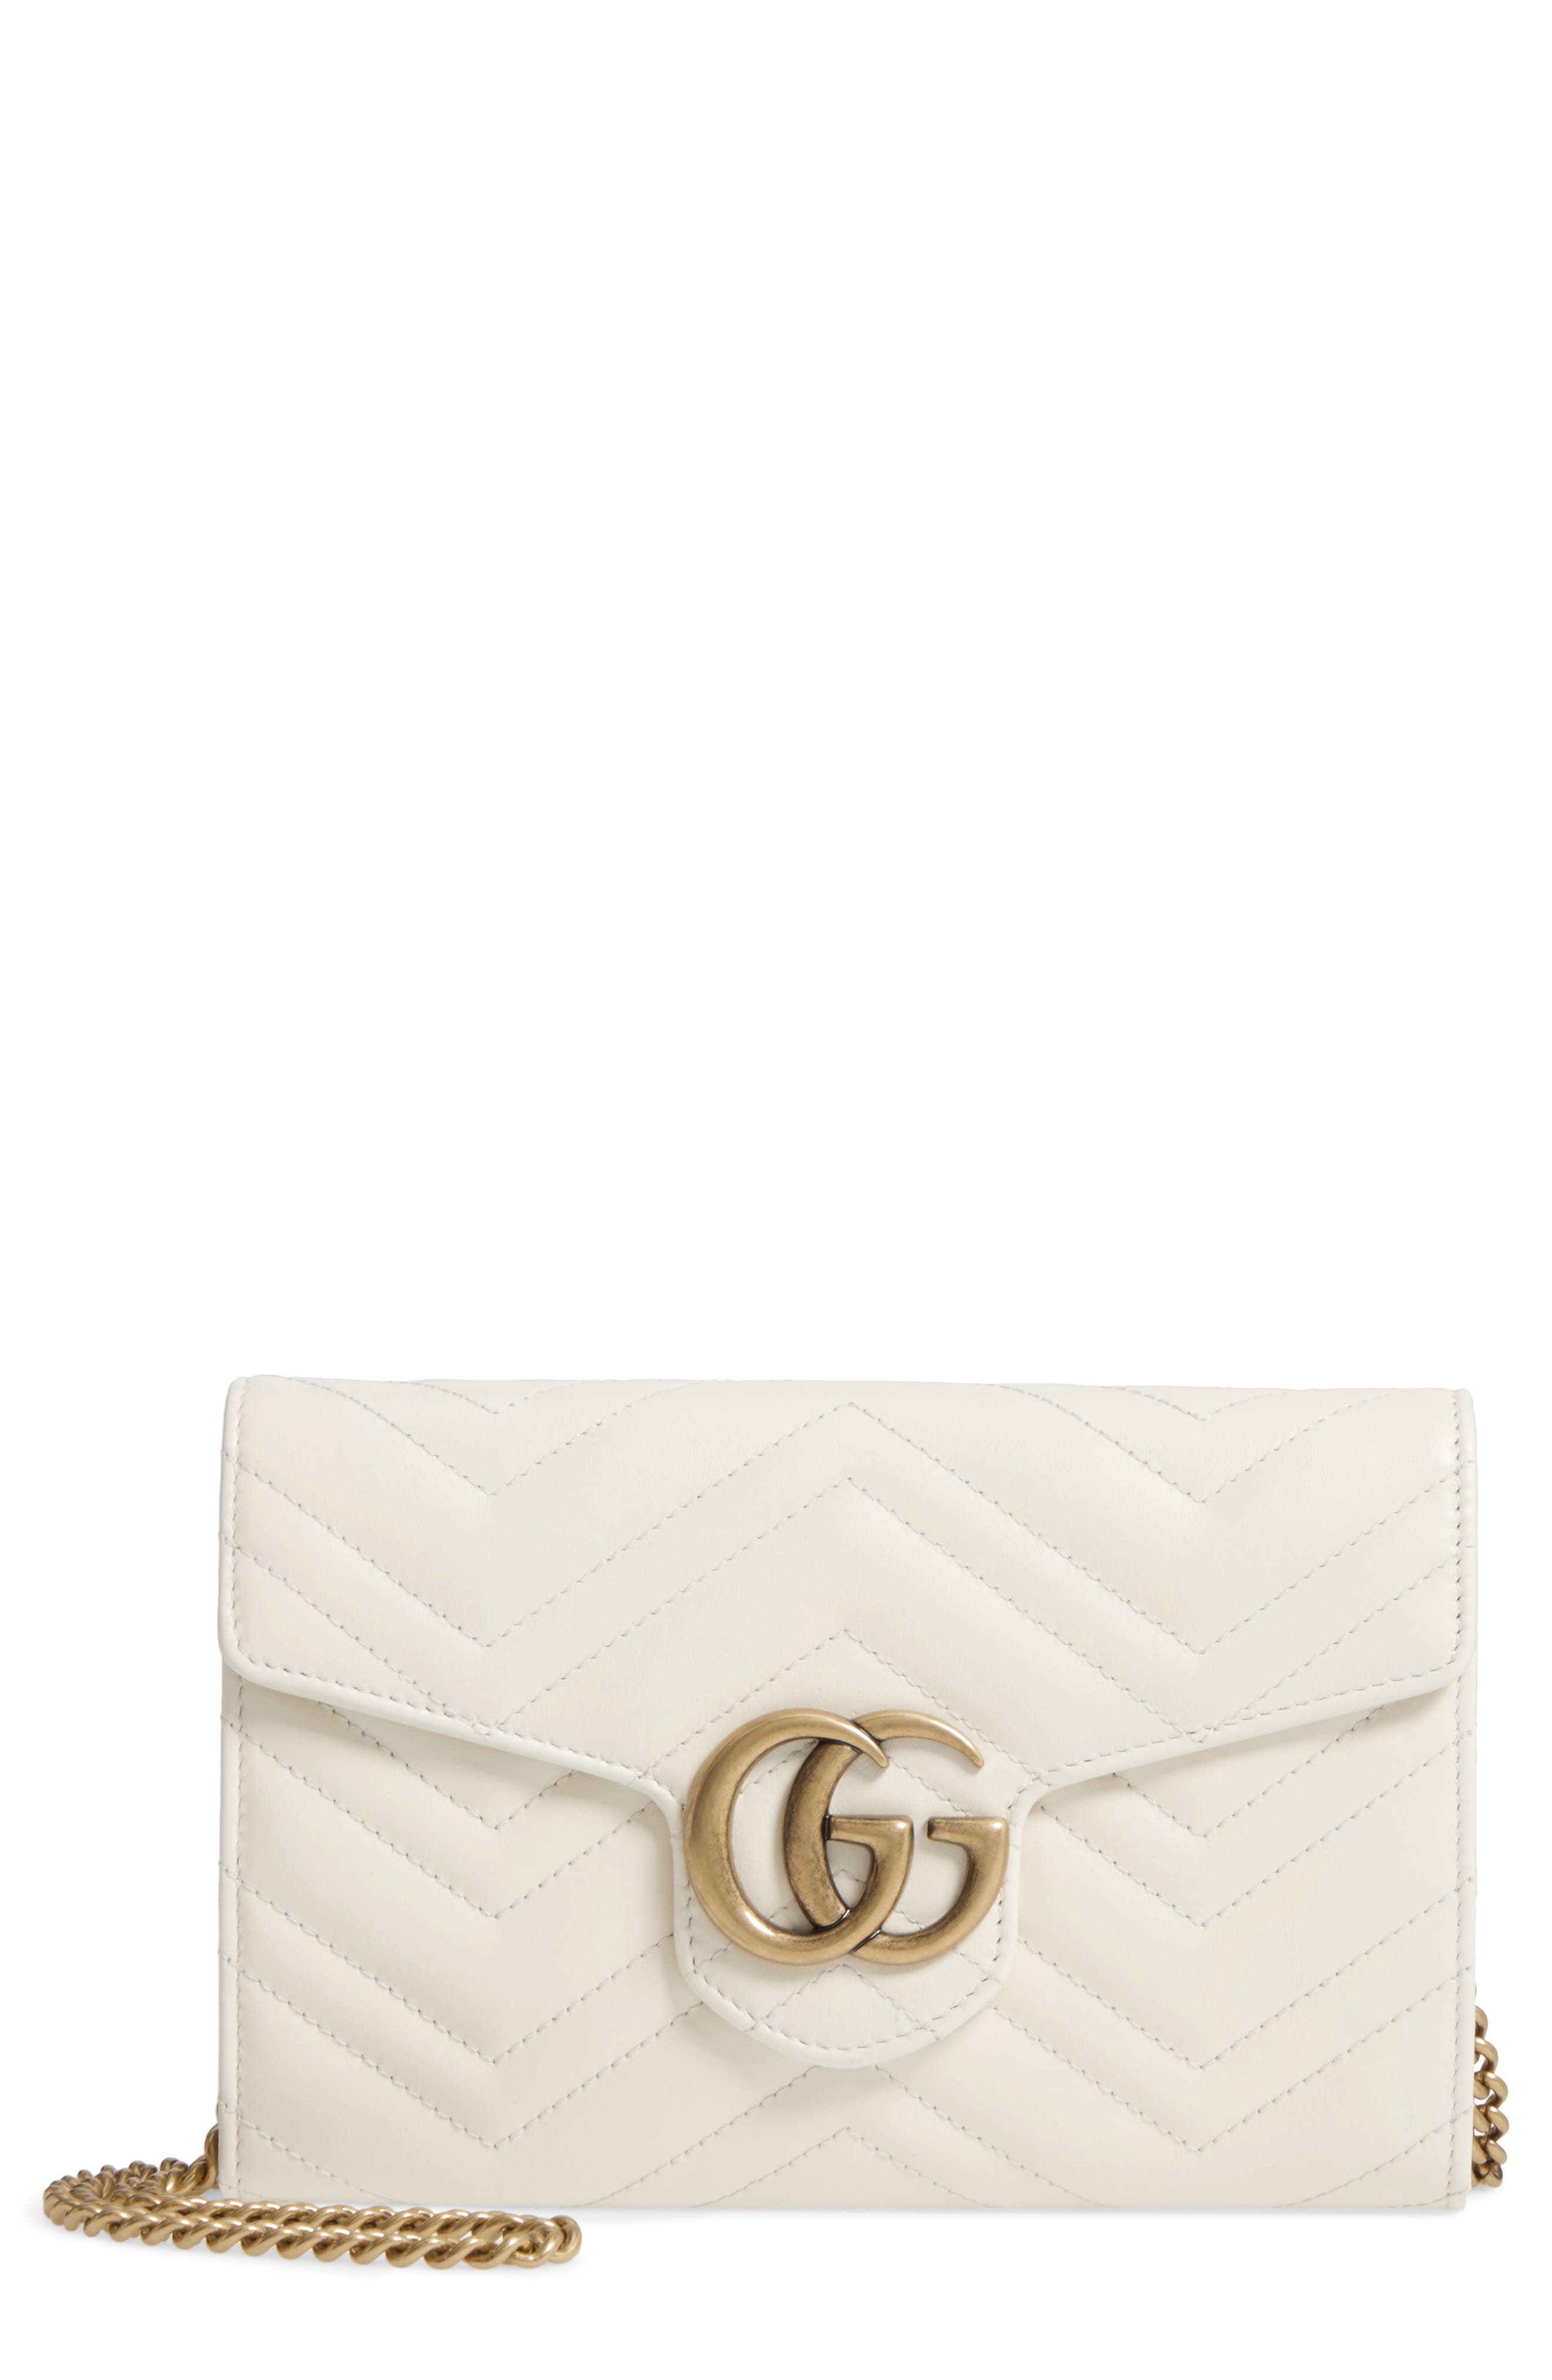 gucci matelasse wallet on chain